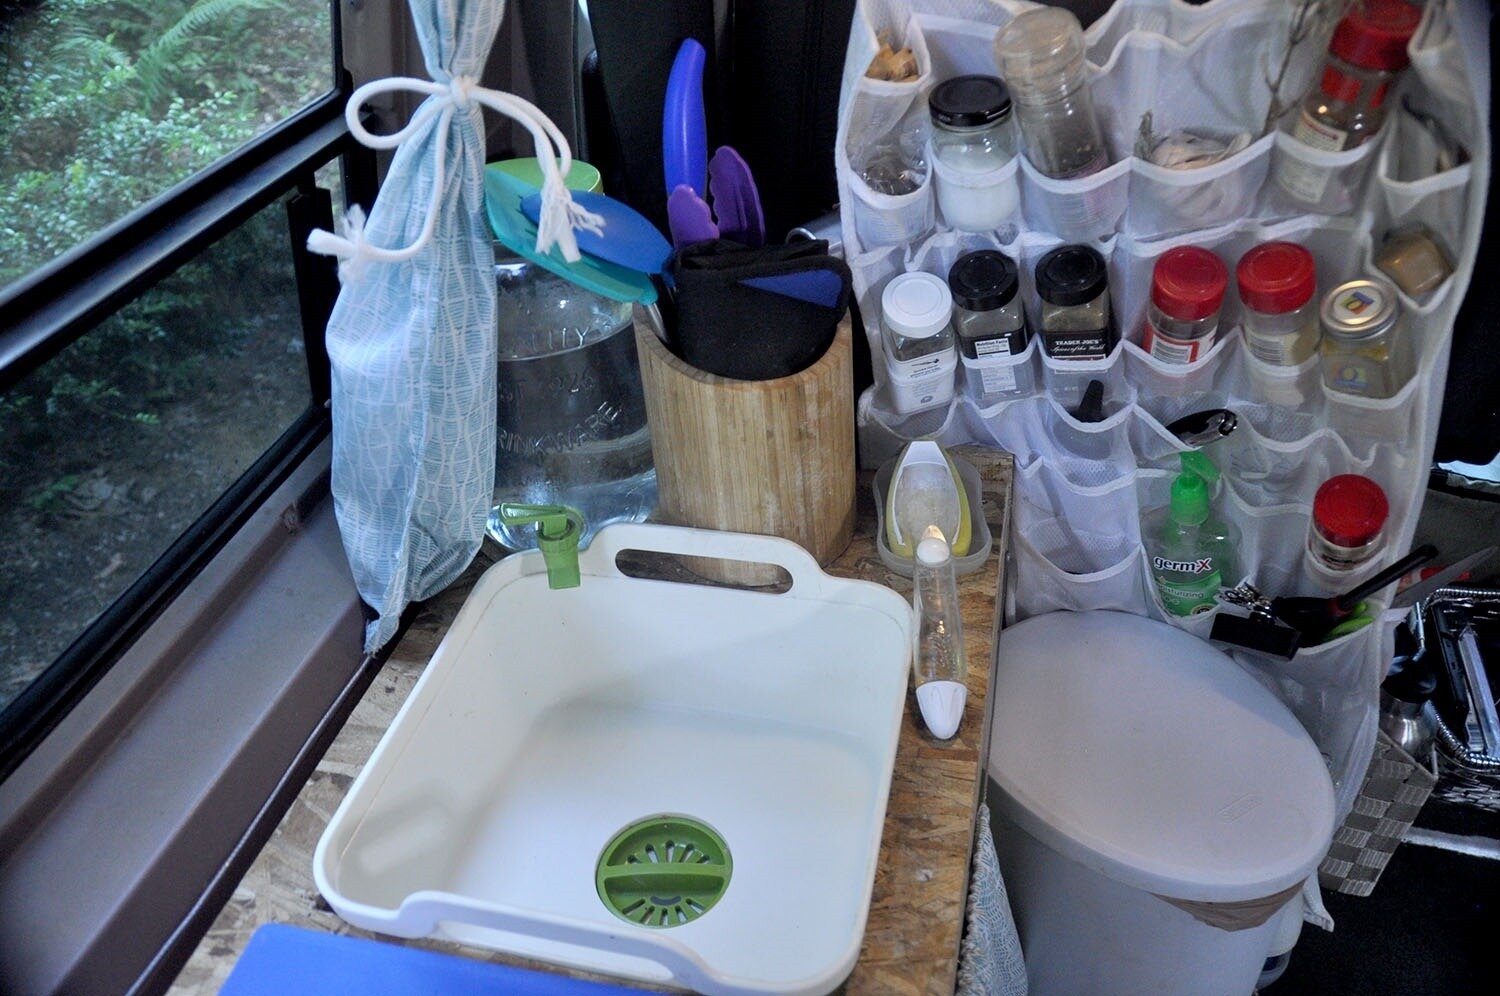 This was the kitchen in our first campervan build, and this picture shows an example of a gravity-fed water jug. (See below for the link to the exact sink we used.)